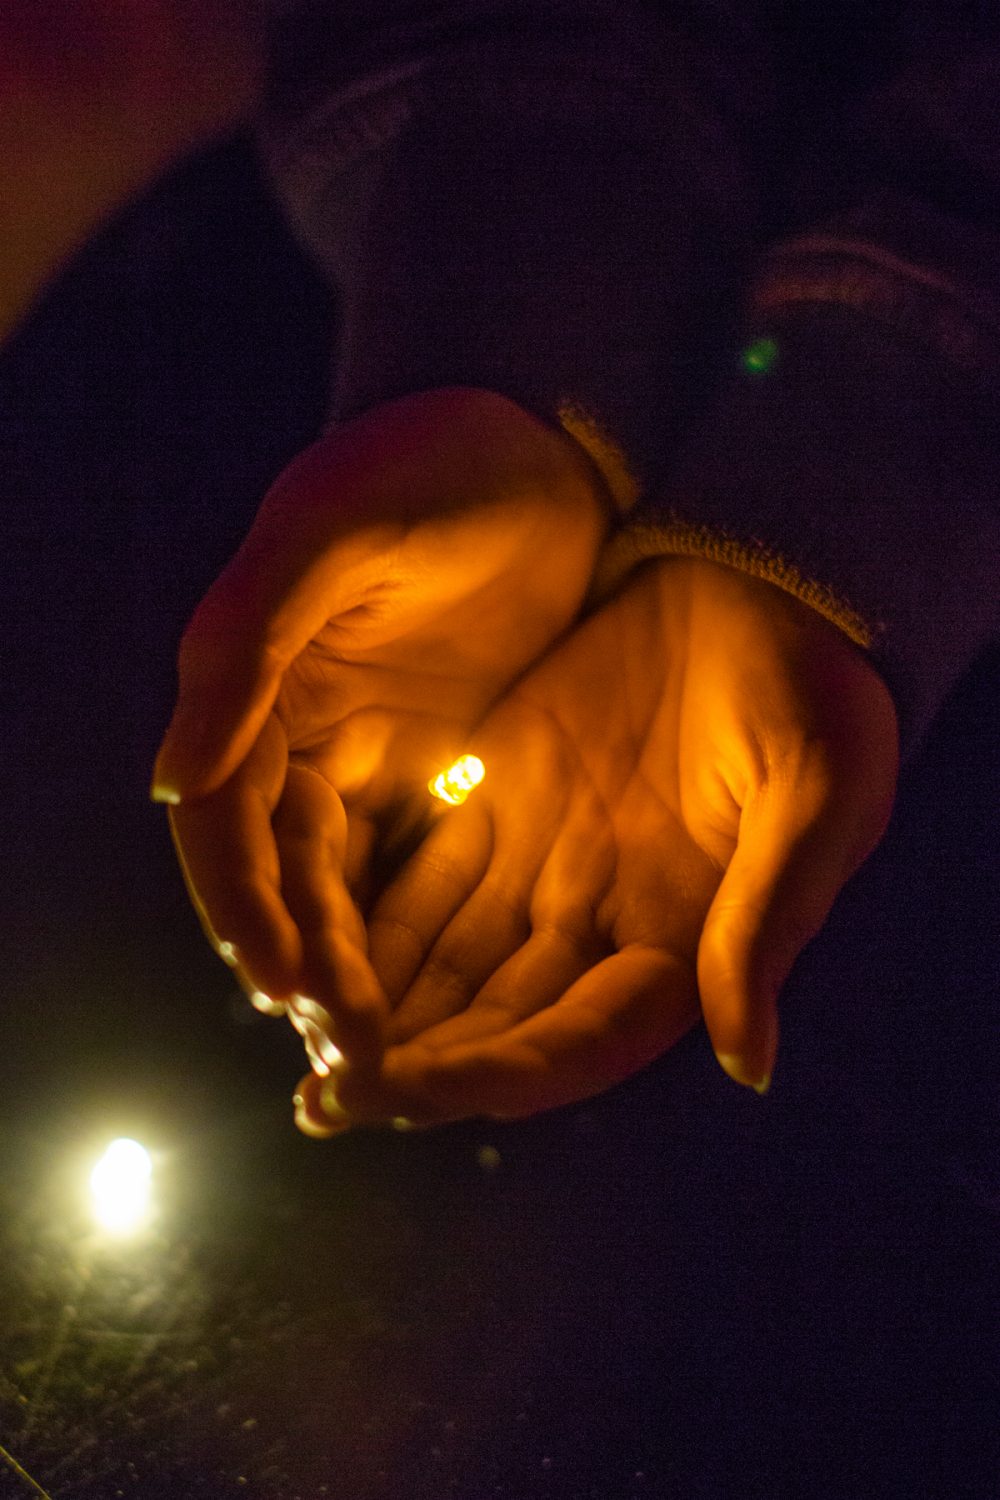 LED light shines in someone's hands